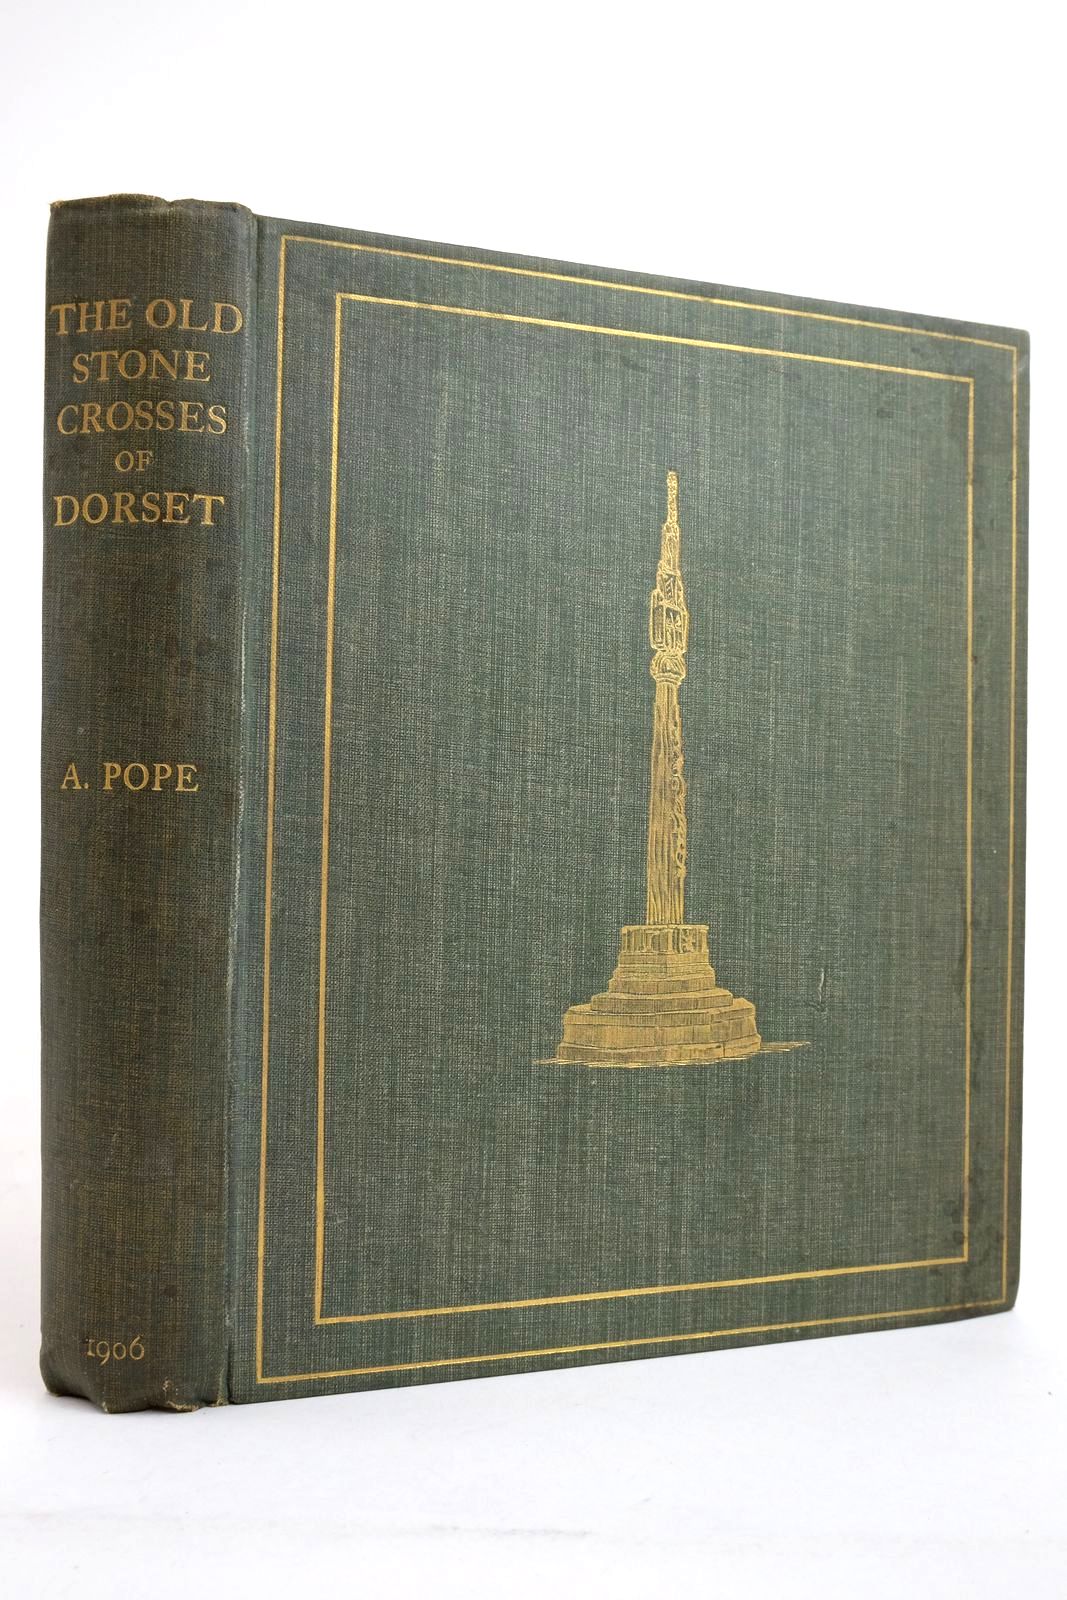 Photo of THE OLD STONE CROSSES OF DORSET written by Pope, Alfred published by Chiswick Press (STOCK CODE: 2135763)  for sale by Stella & Rose's Books